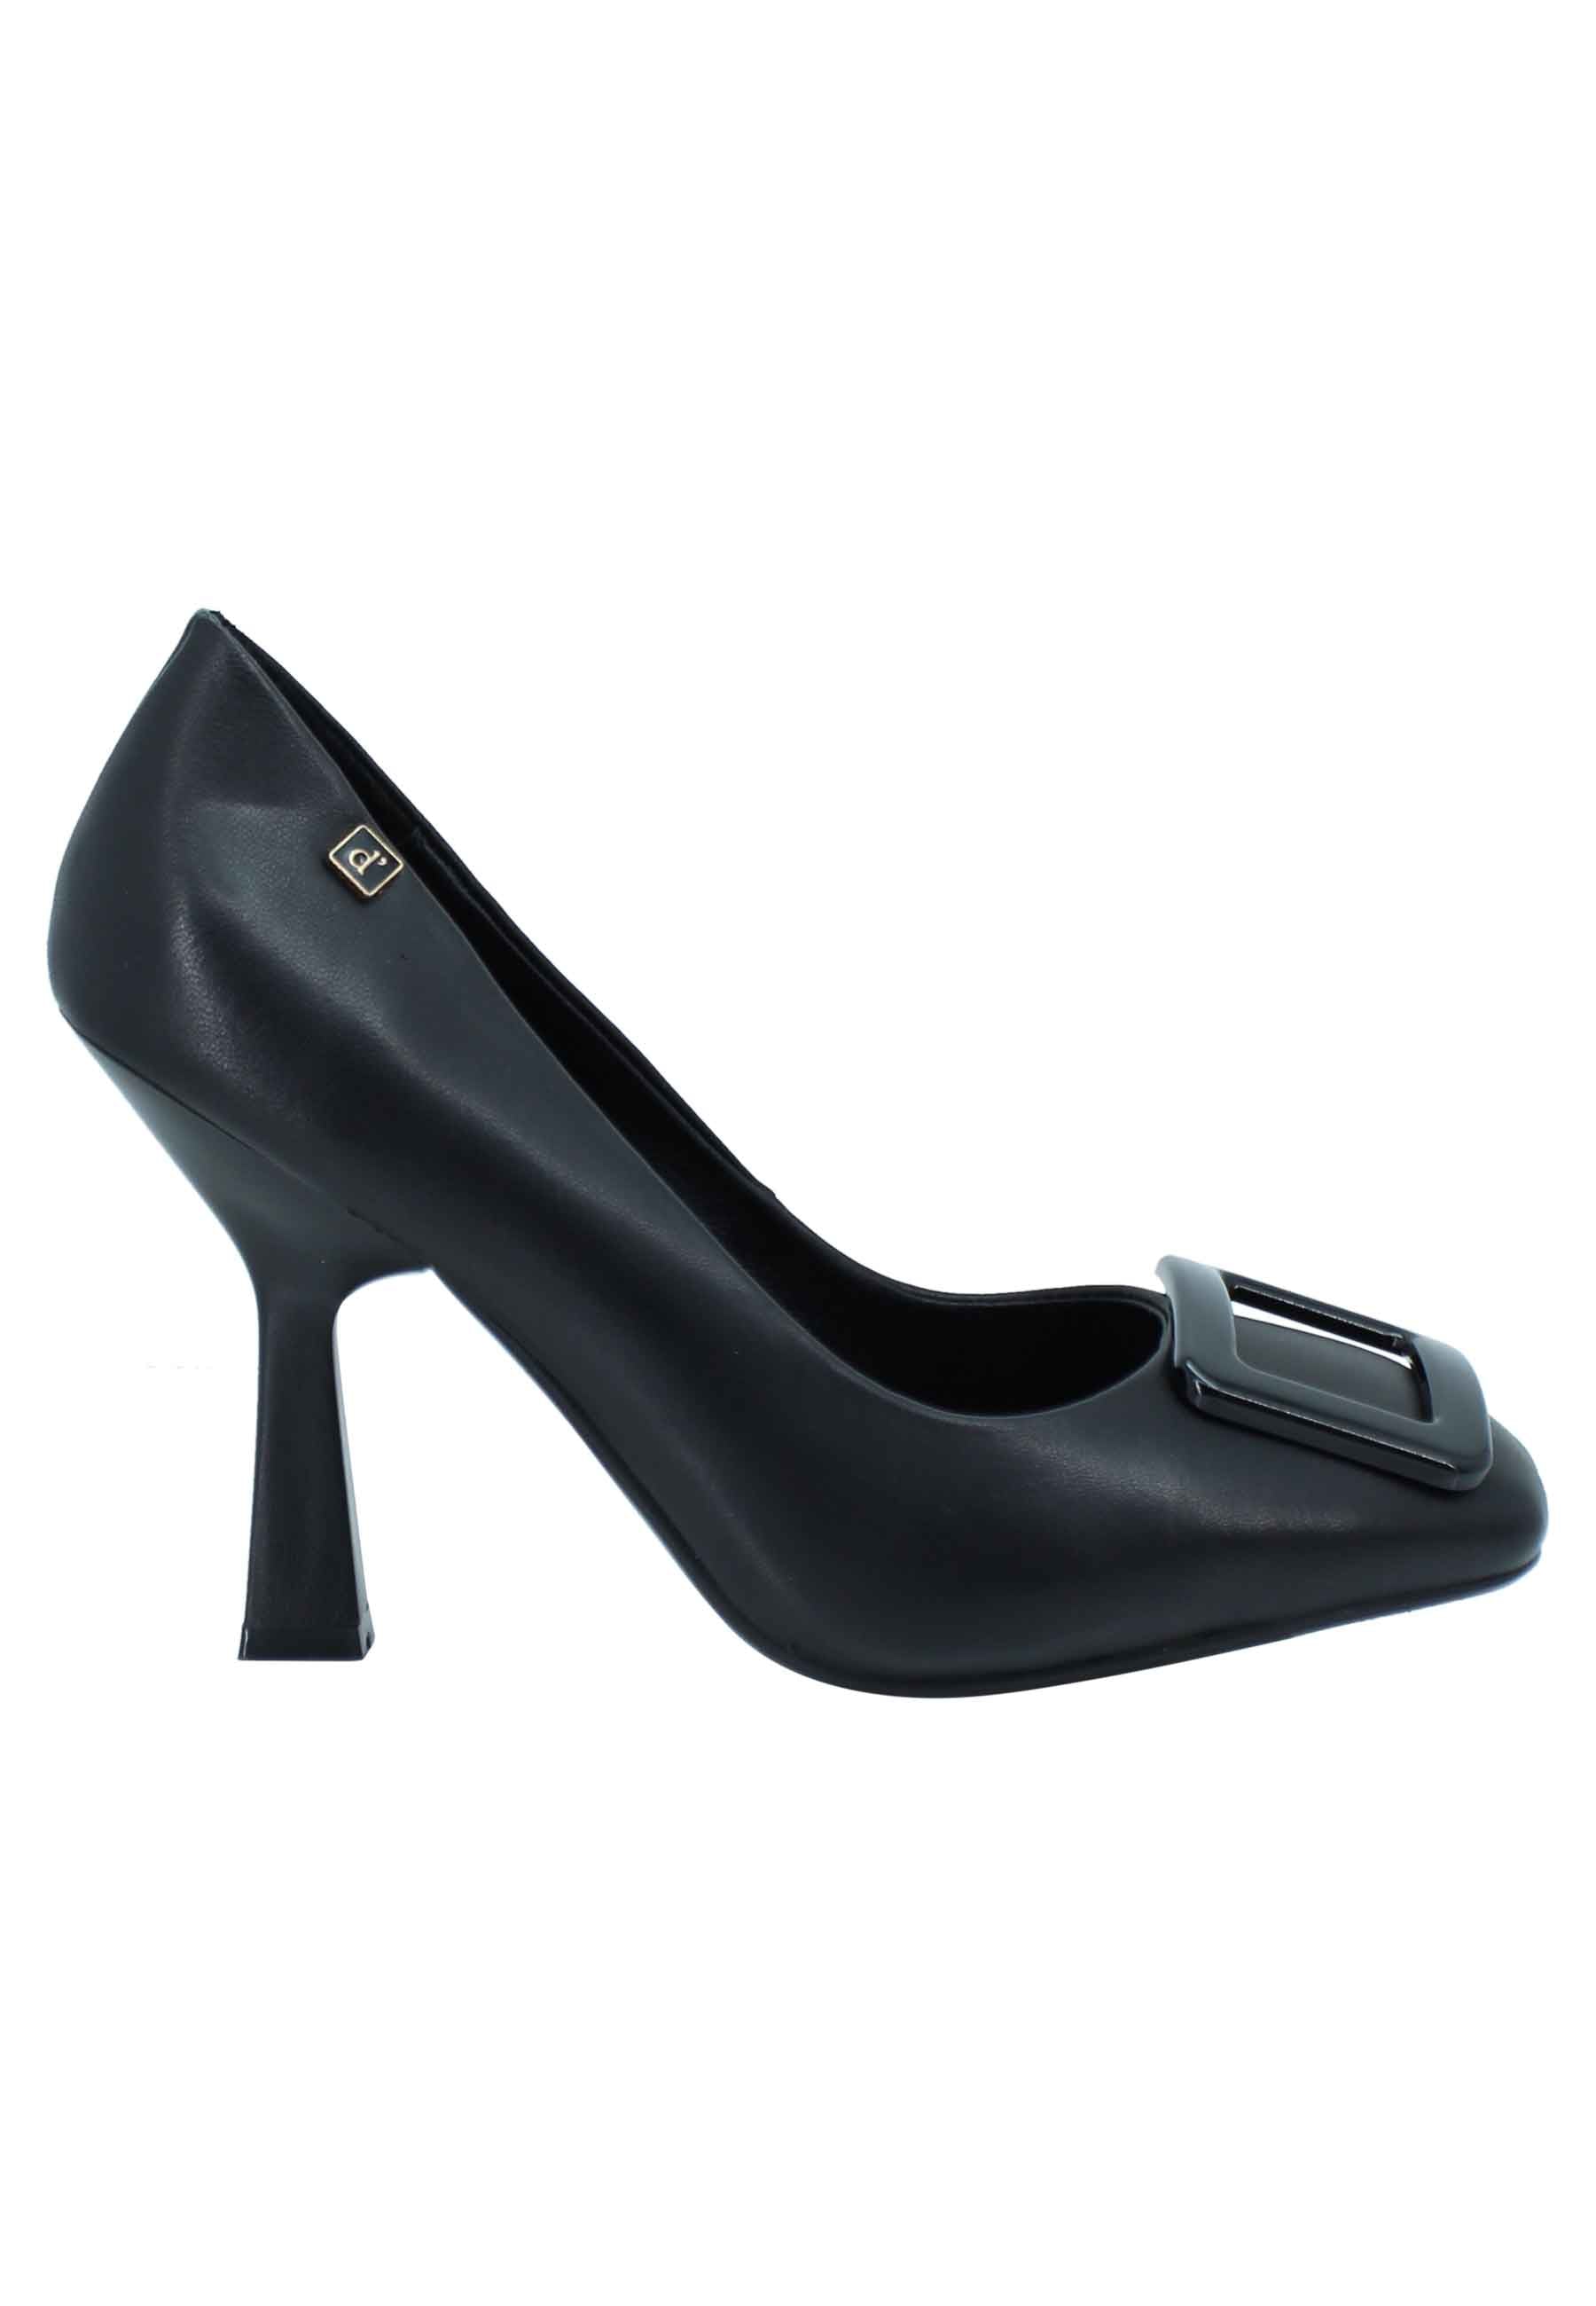 Women's pumps in black leather with square toe and matching accessory